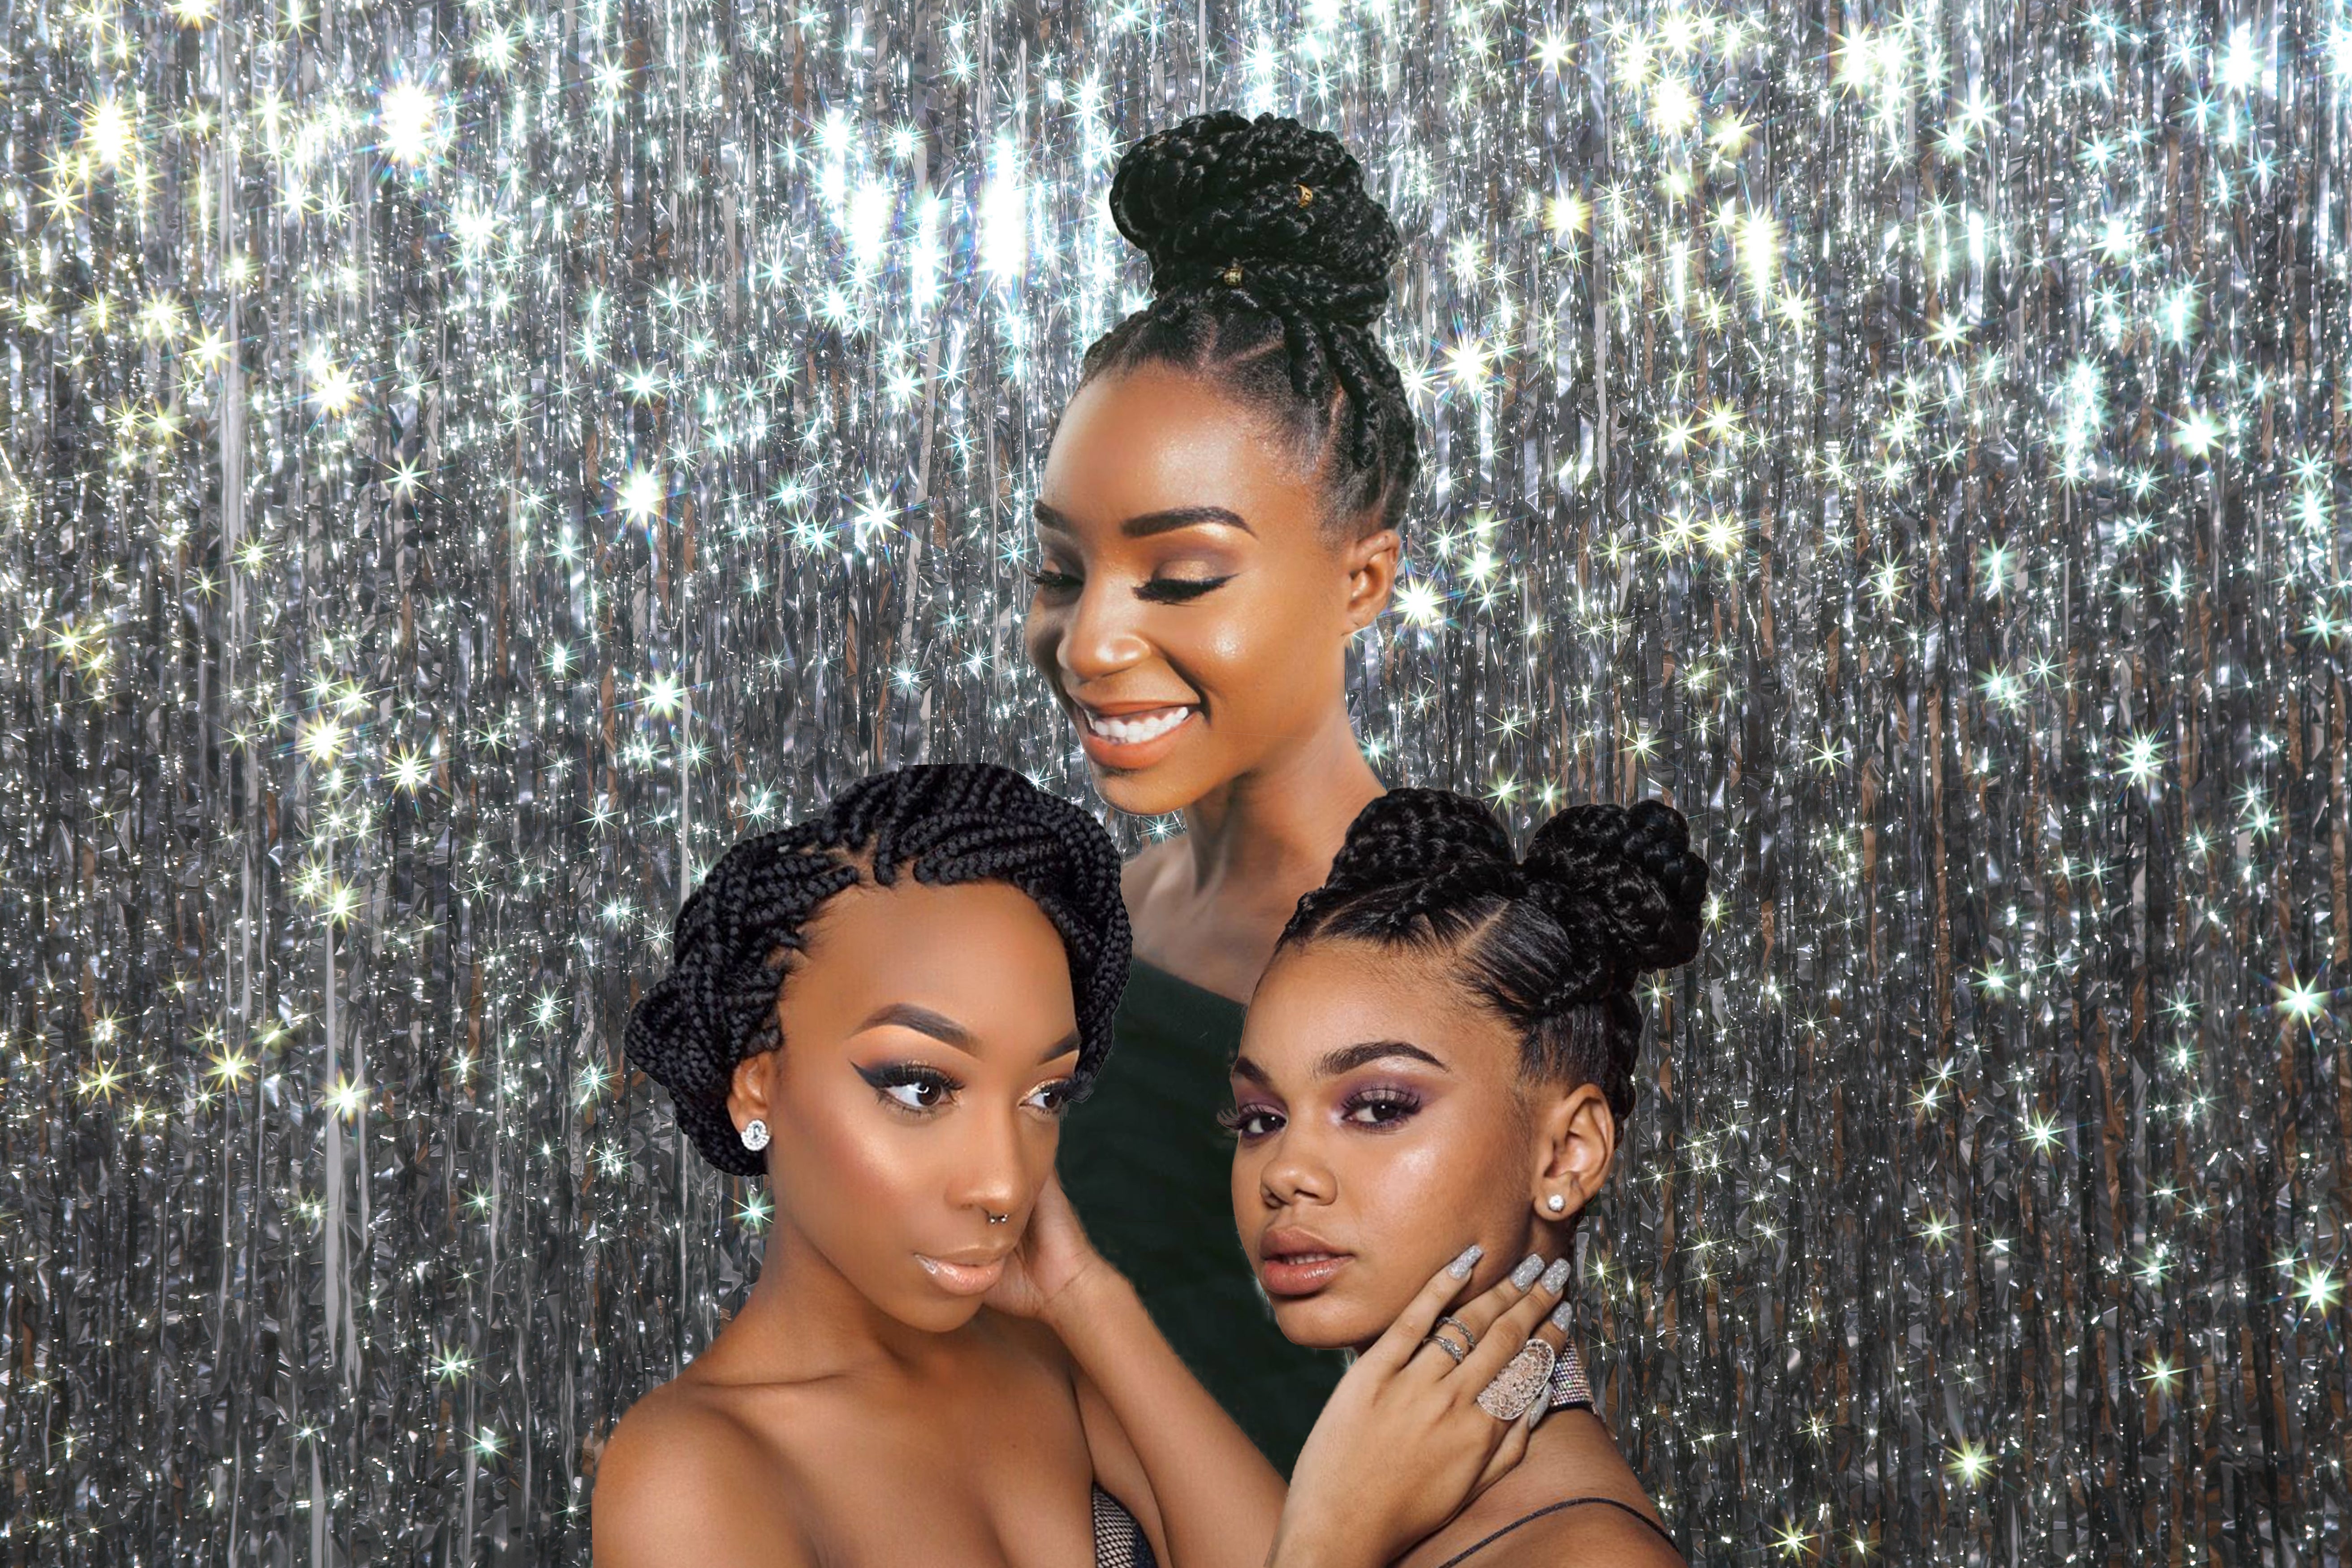 20 Braided Prom Hairstyles Fit For A Queen